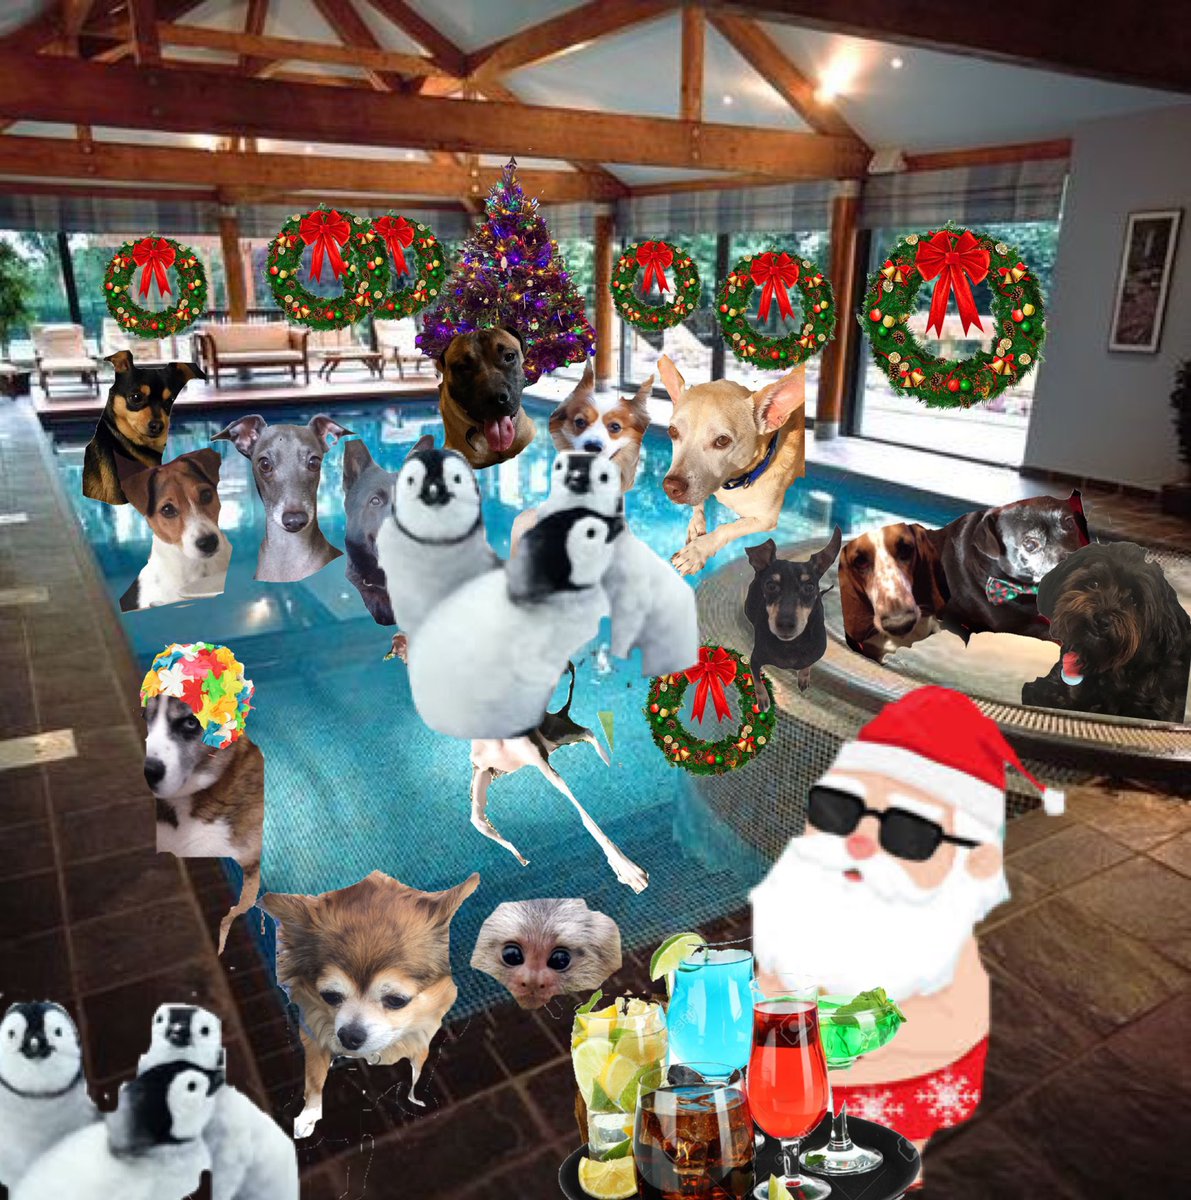 A quick romp in the pool before Christmas dinner is ready, Jesse, Pug Sausage is joining Bella and LJ in the hot@DangerDawgz #DangerDawgz @dawgz_fanclub @Yellowonetsy @LJ_doodle